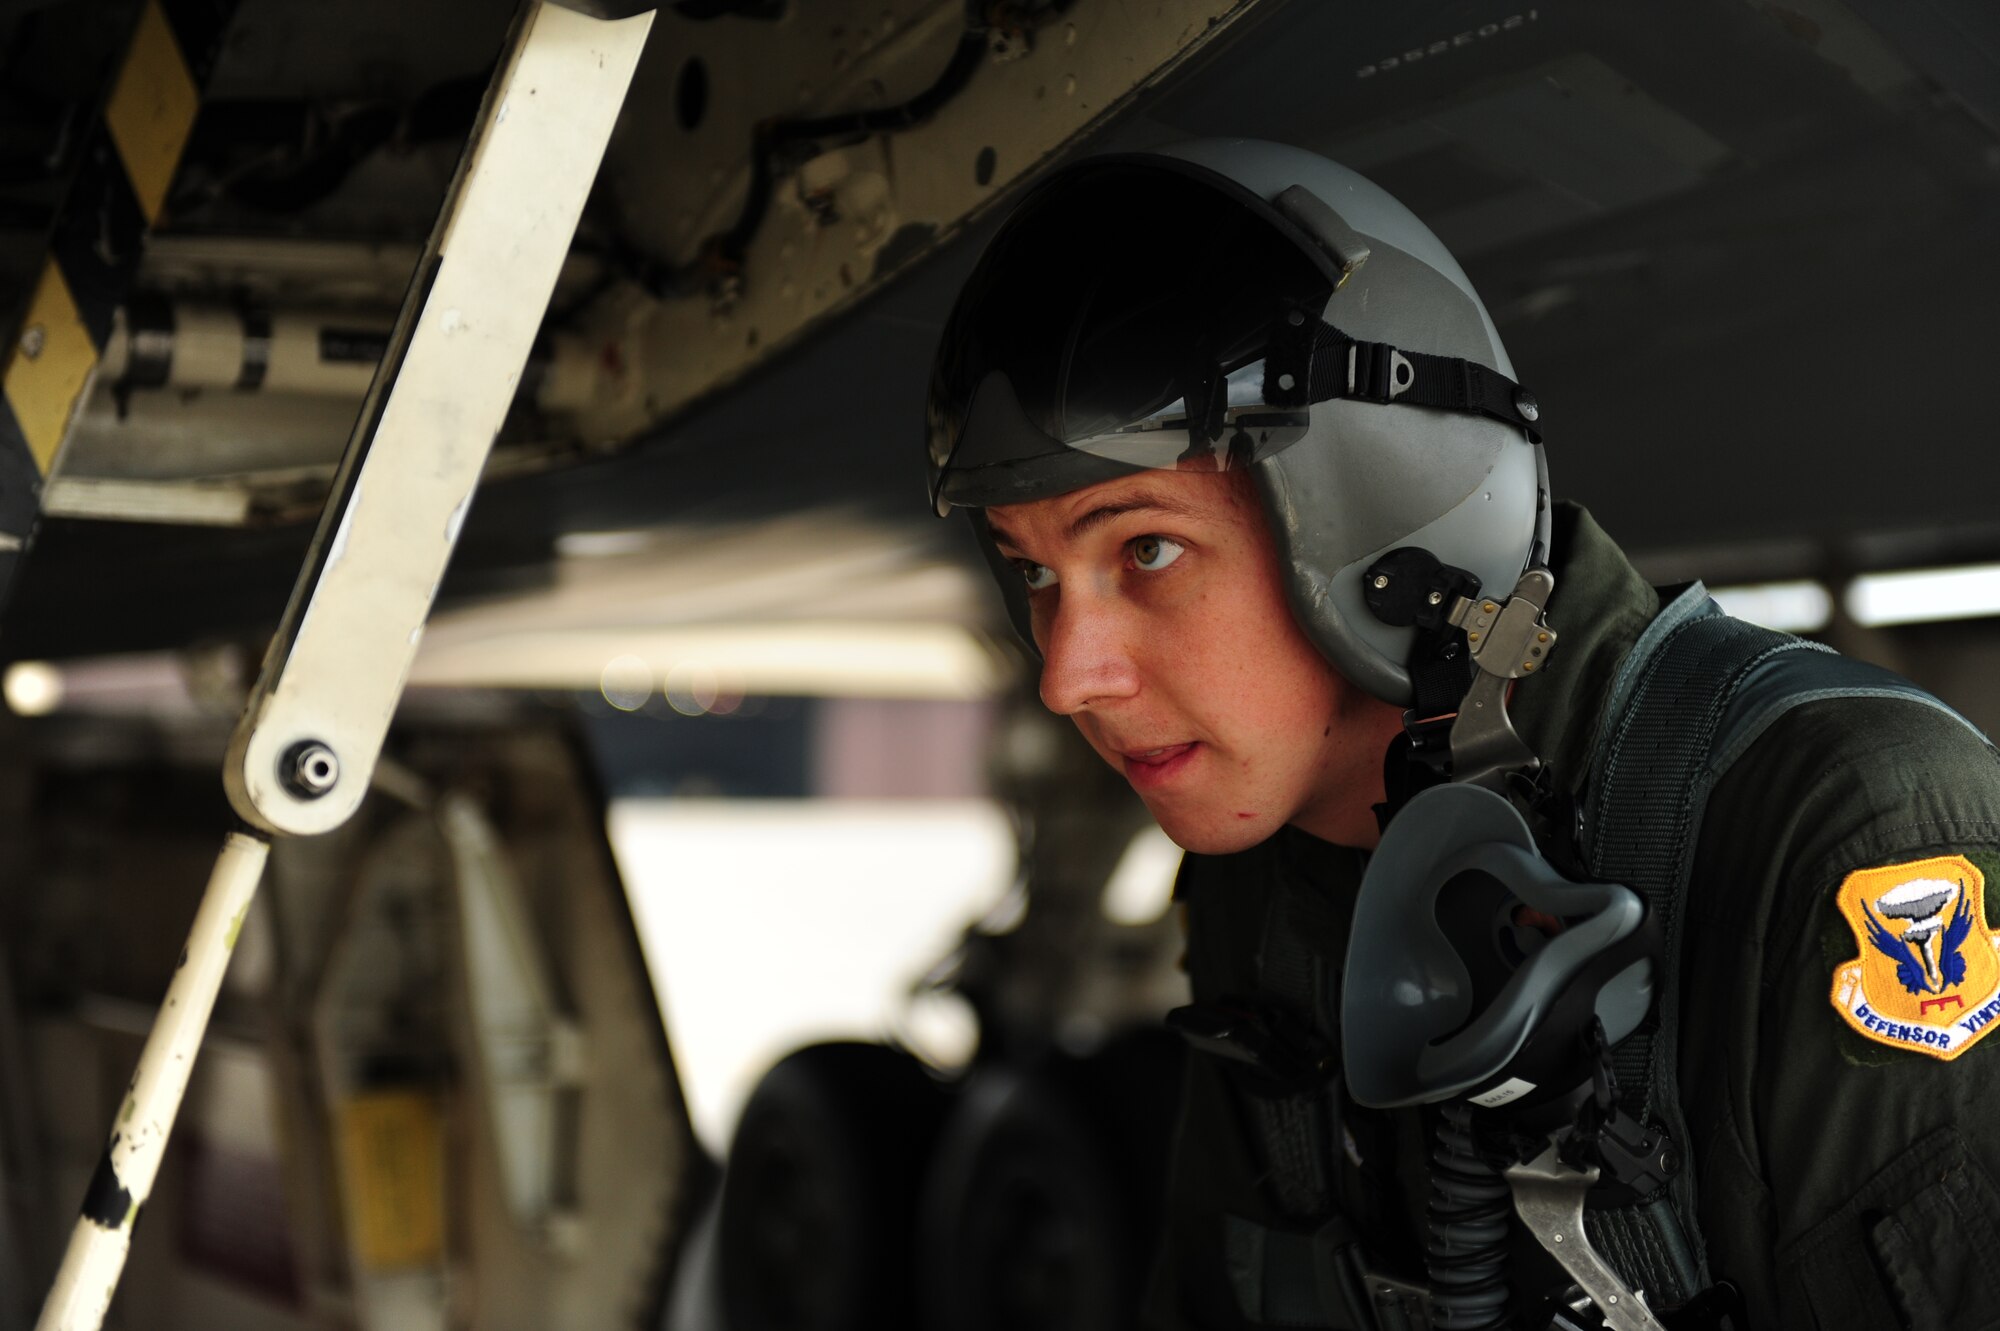 Air Force Staff Sgt. Brian Schroeder, 509th Aircraft Maintenance Squadron dedicated crew chief, prepares to board a B-2 Spirit at Whiteman Air Force Base, Mo., July 10, 2015. Schroeder was awarded an incentive flight in the B-2 Spirit for being named the 2014 Air Force Global Strike Command Crew Chief of the Year. Two other Crew Chiefs of the Year were also given incentive flights the same day. (U.S. Air Force photo by Senior Airman Joel Pfiester/Released)